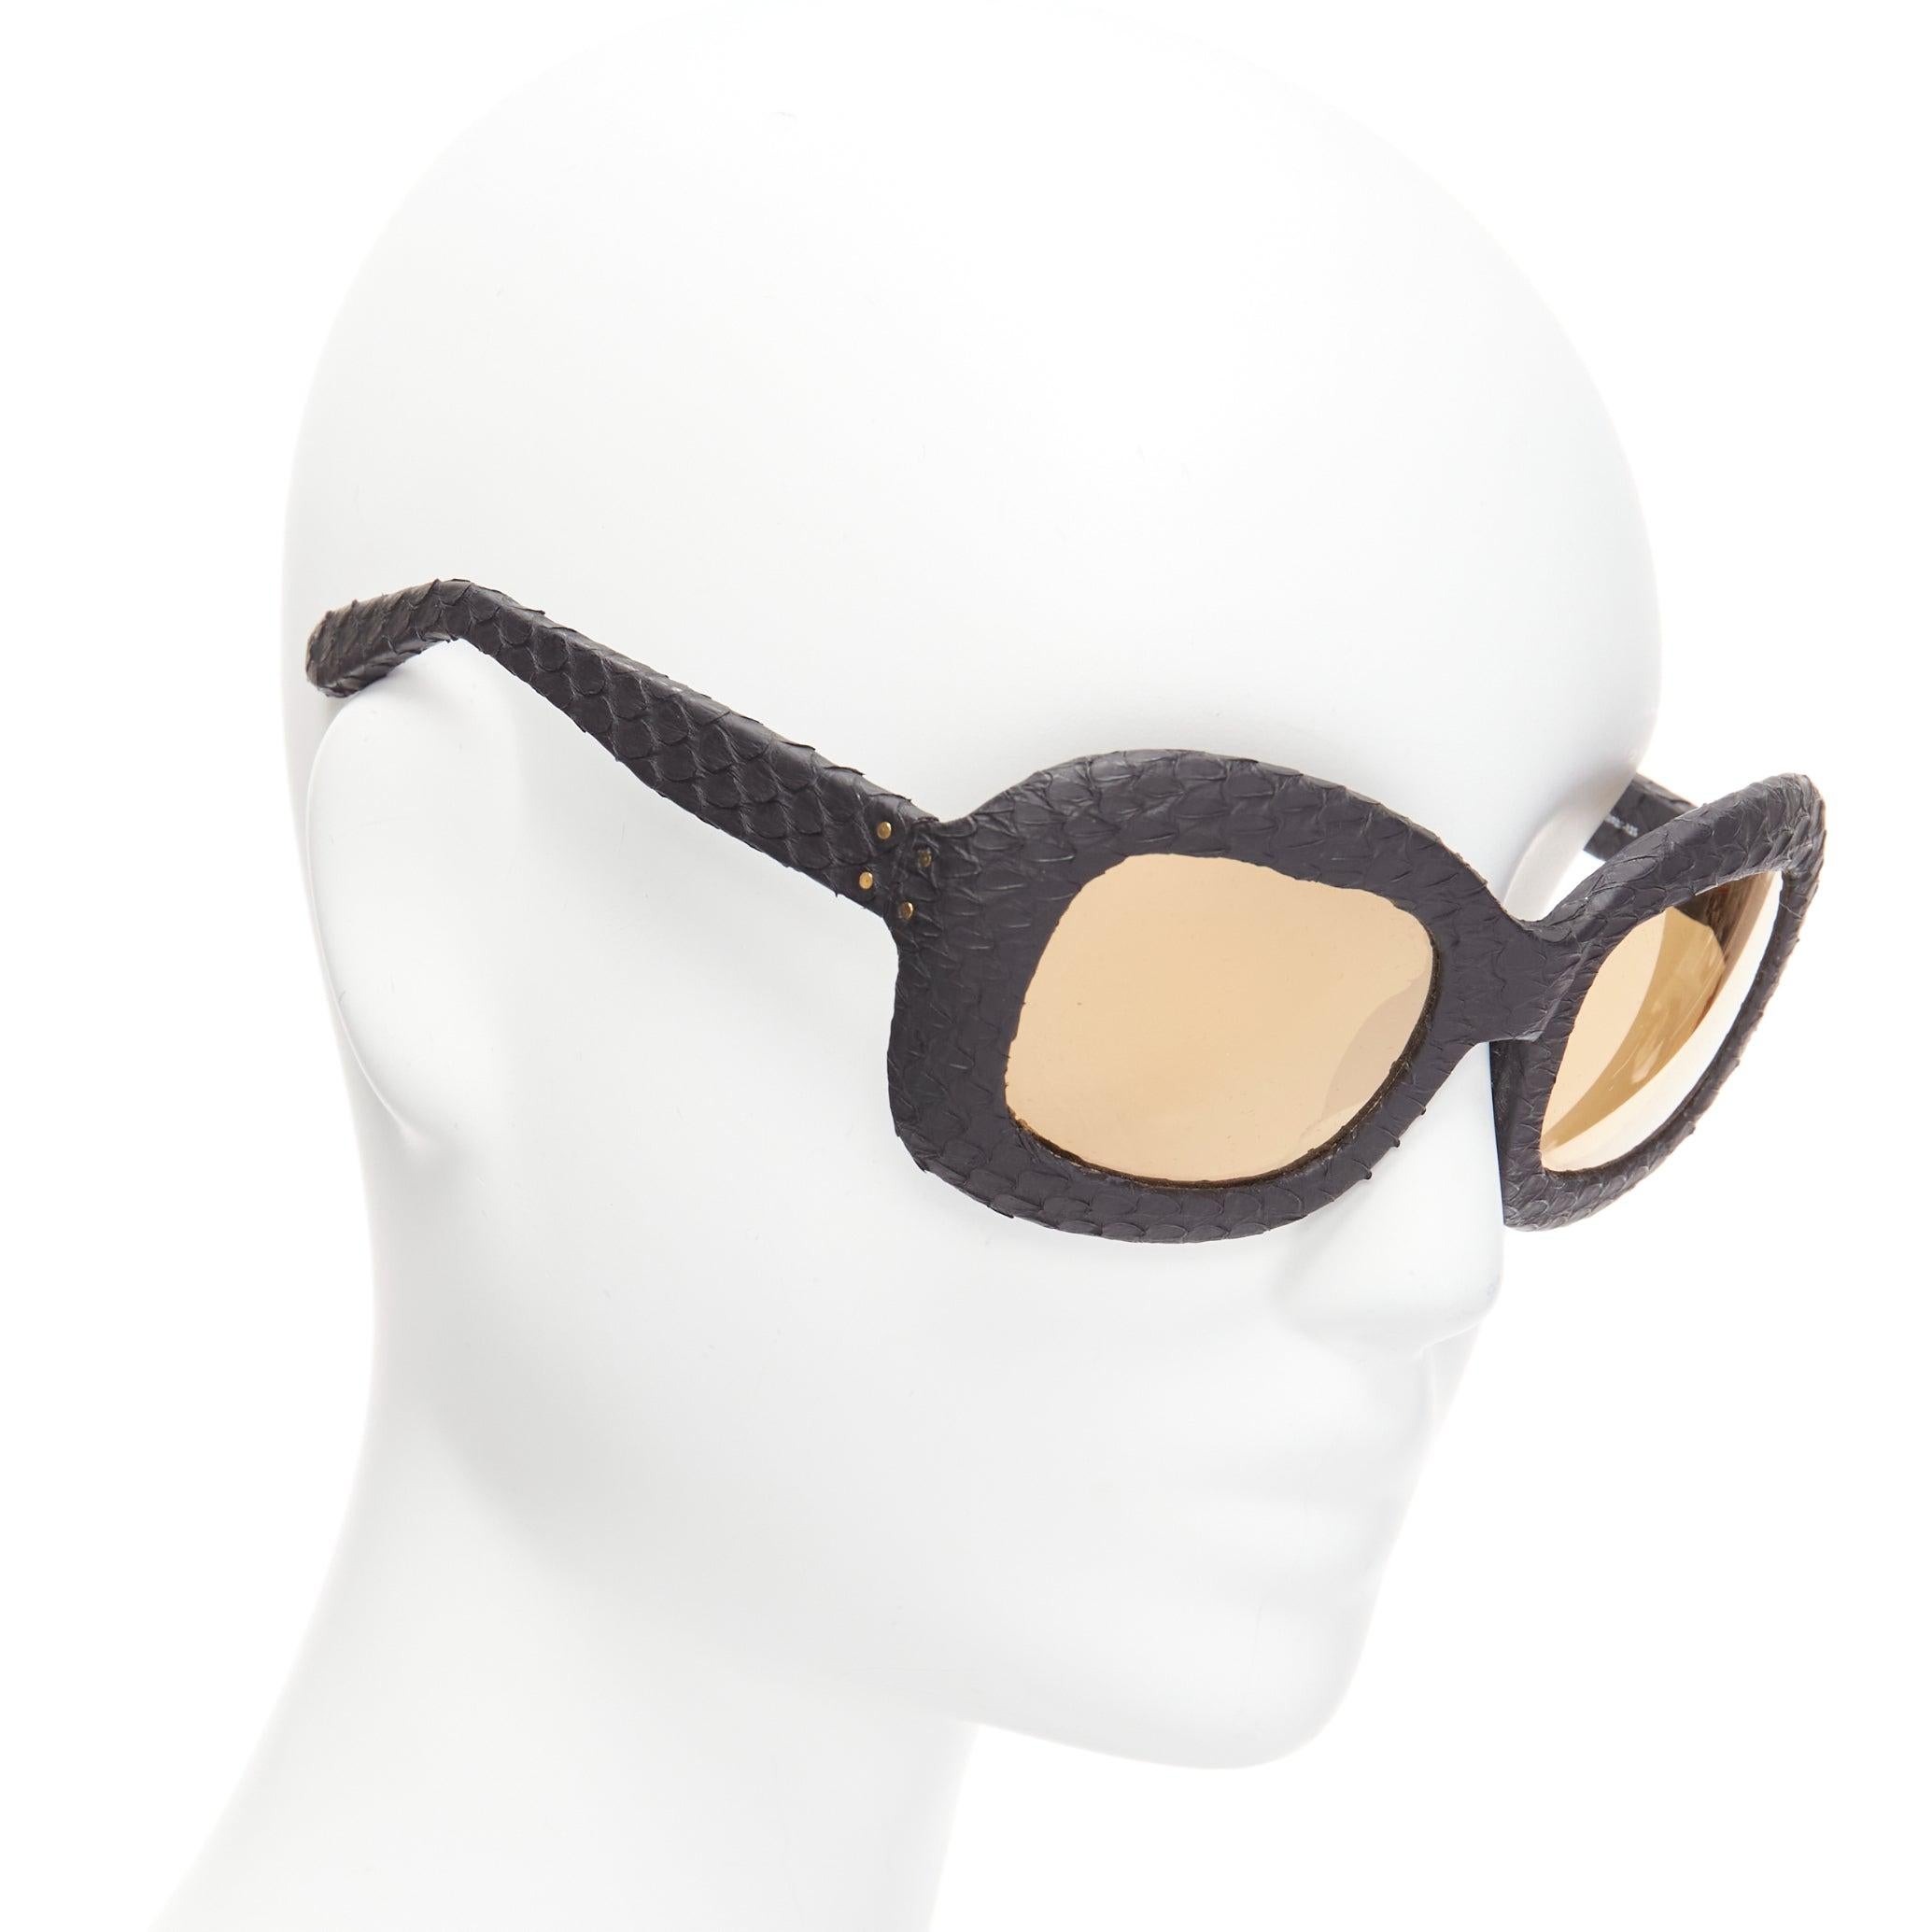 LINDA FARROW LUXE matte black scaled frame reflective gold oversized sunglasses
Reference: NKLL/A00090
Brand: Linda Farrow
Model: 53 25 125
Color: Black, Gold
Pattern: Animal Print
Made in: Japan

CONDITION:
Condition: Excellent, this item was